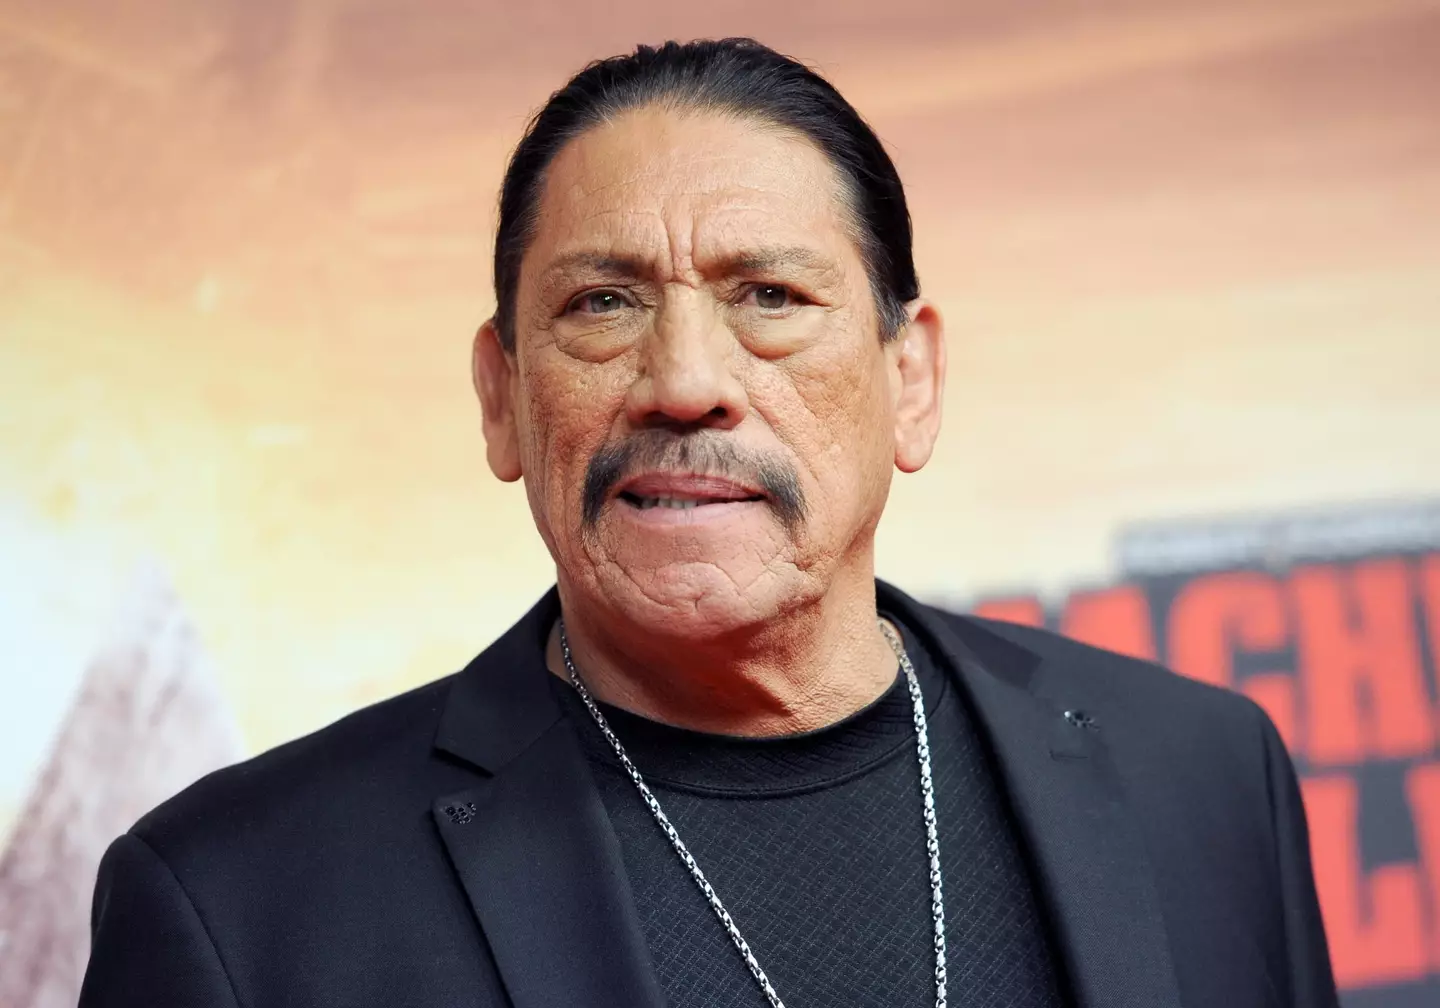 Trejo ended up turning down the role in American Me after his conversation with the Mexican Mafia leader.